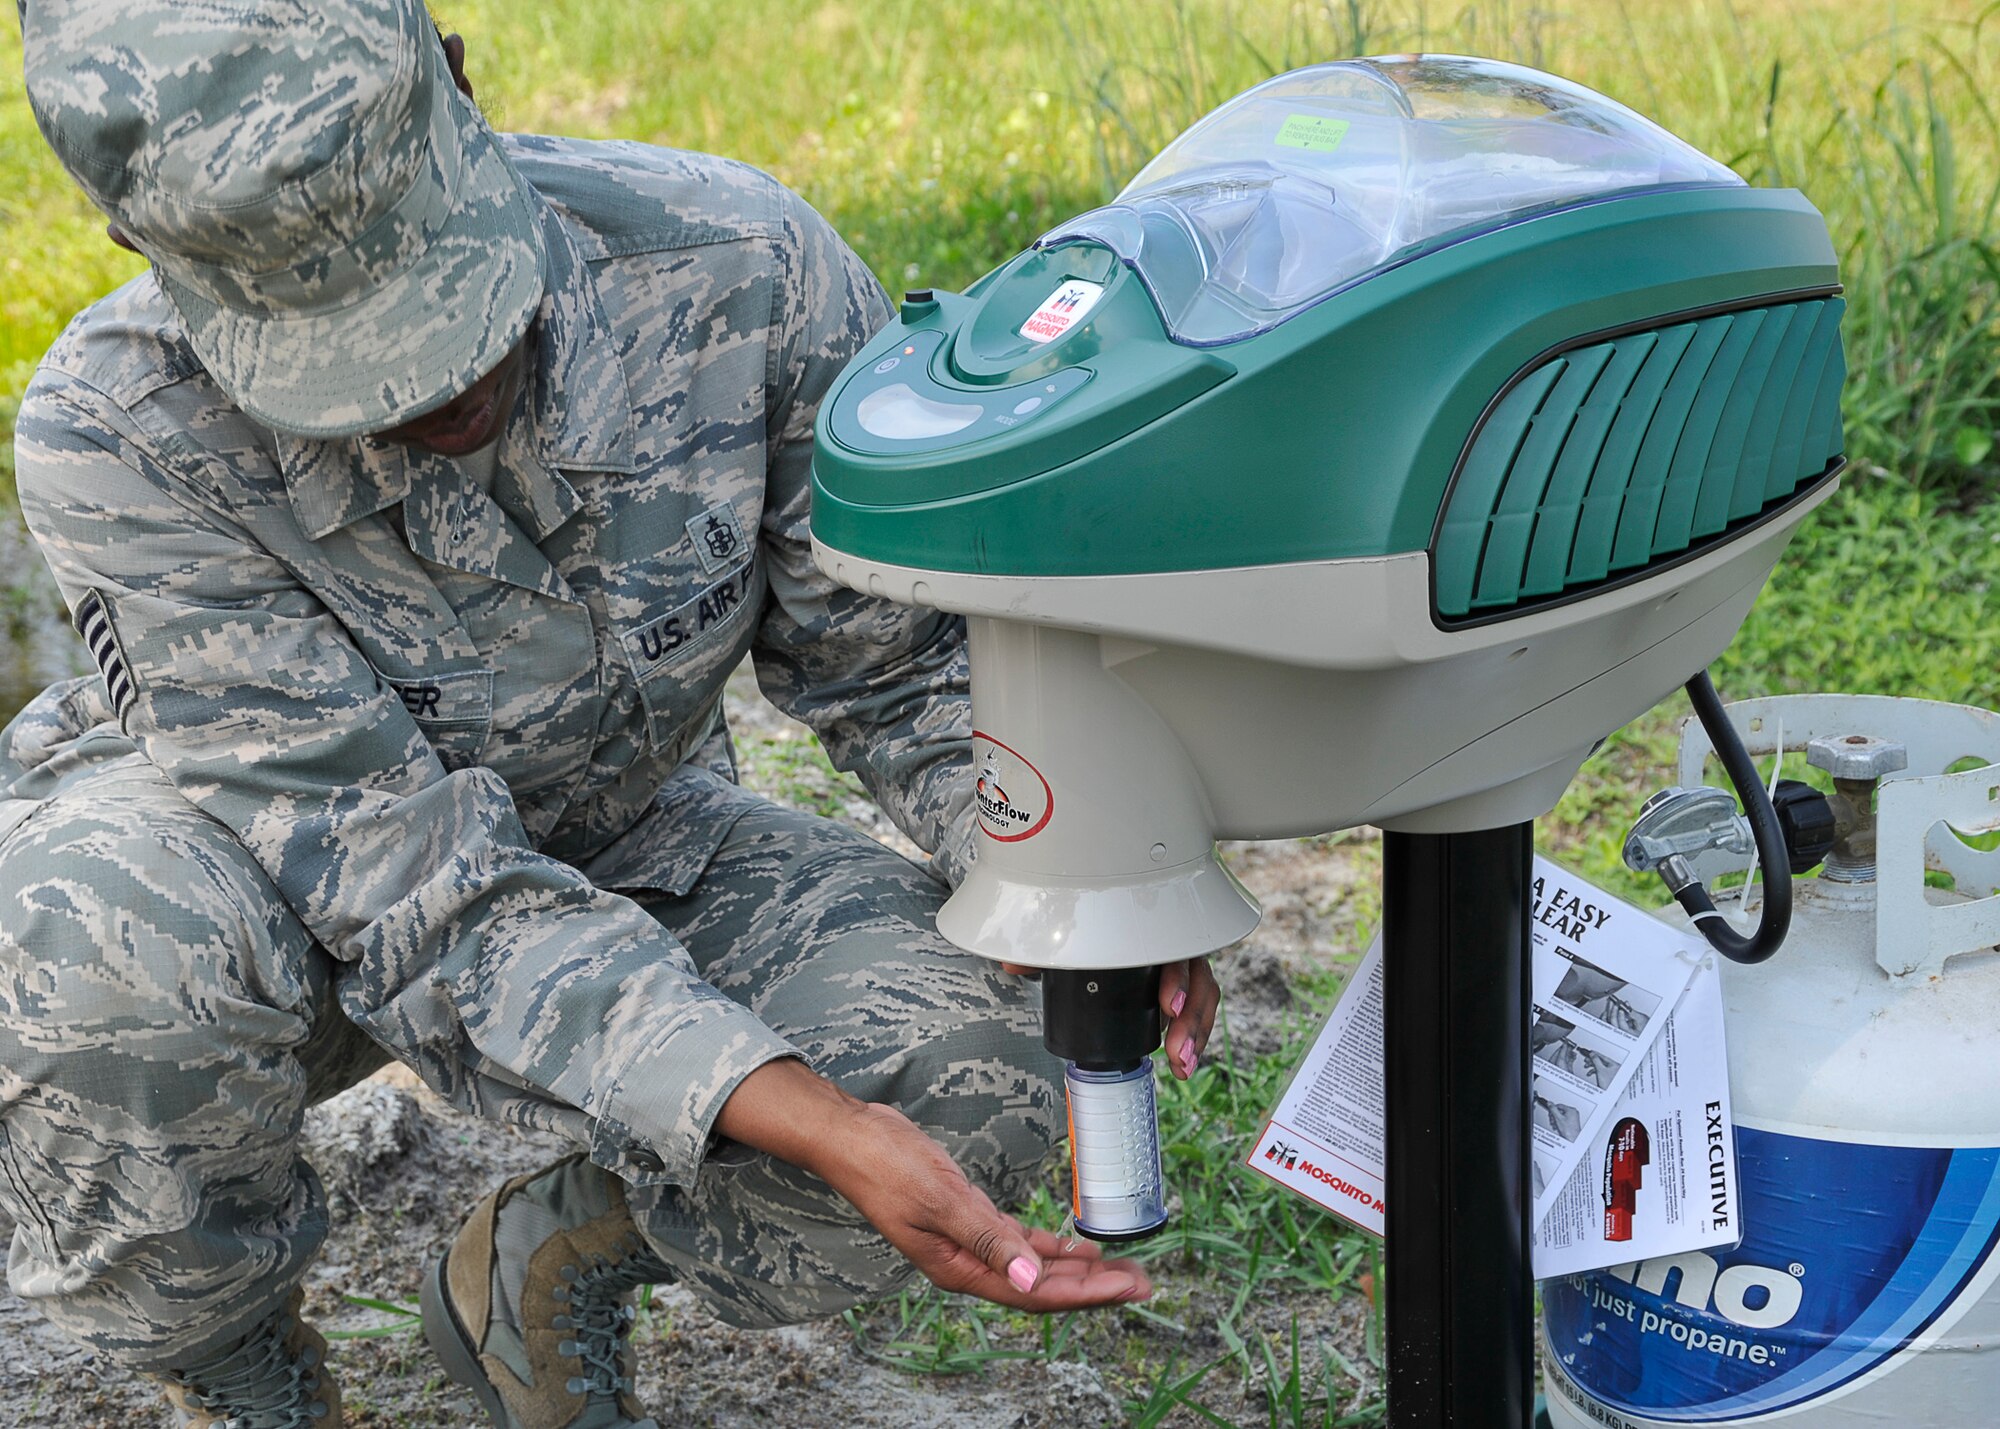 Tech. Sgt. Tanisha Spencer, 325th Aerospace Medical Squadron NCO in charge of community health, prepares a mosquito trap May 20 at the base track. After mosquitoes are identified and tested, 325th ADMS then calls the 325th Civil Engineering Squadron to keep the mosquito population down. (U.S. Air Force photo by Airman 1st Class Solomon Cook)